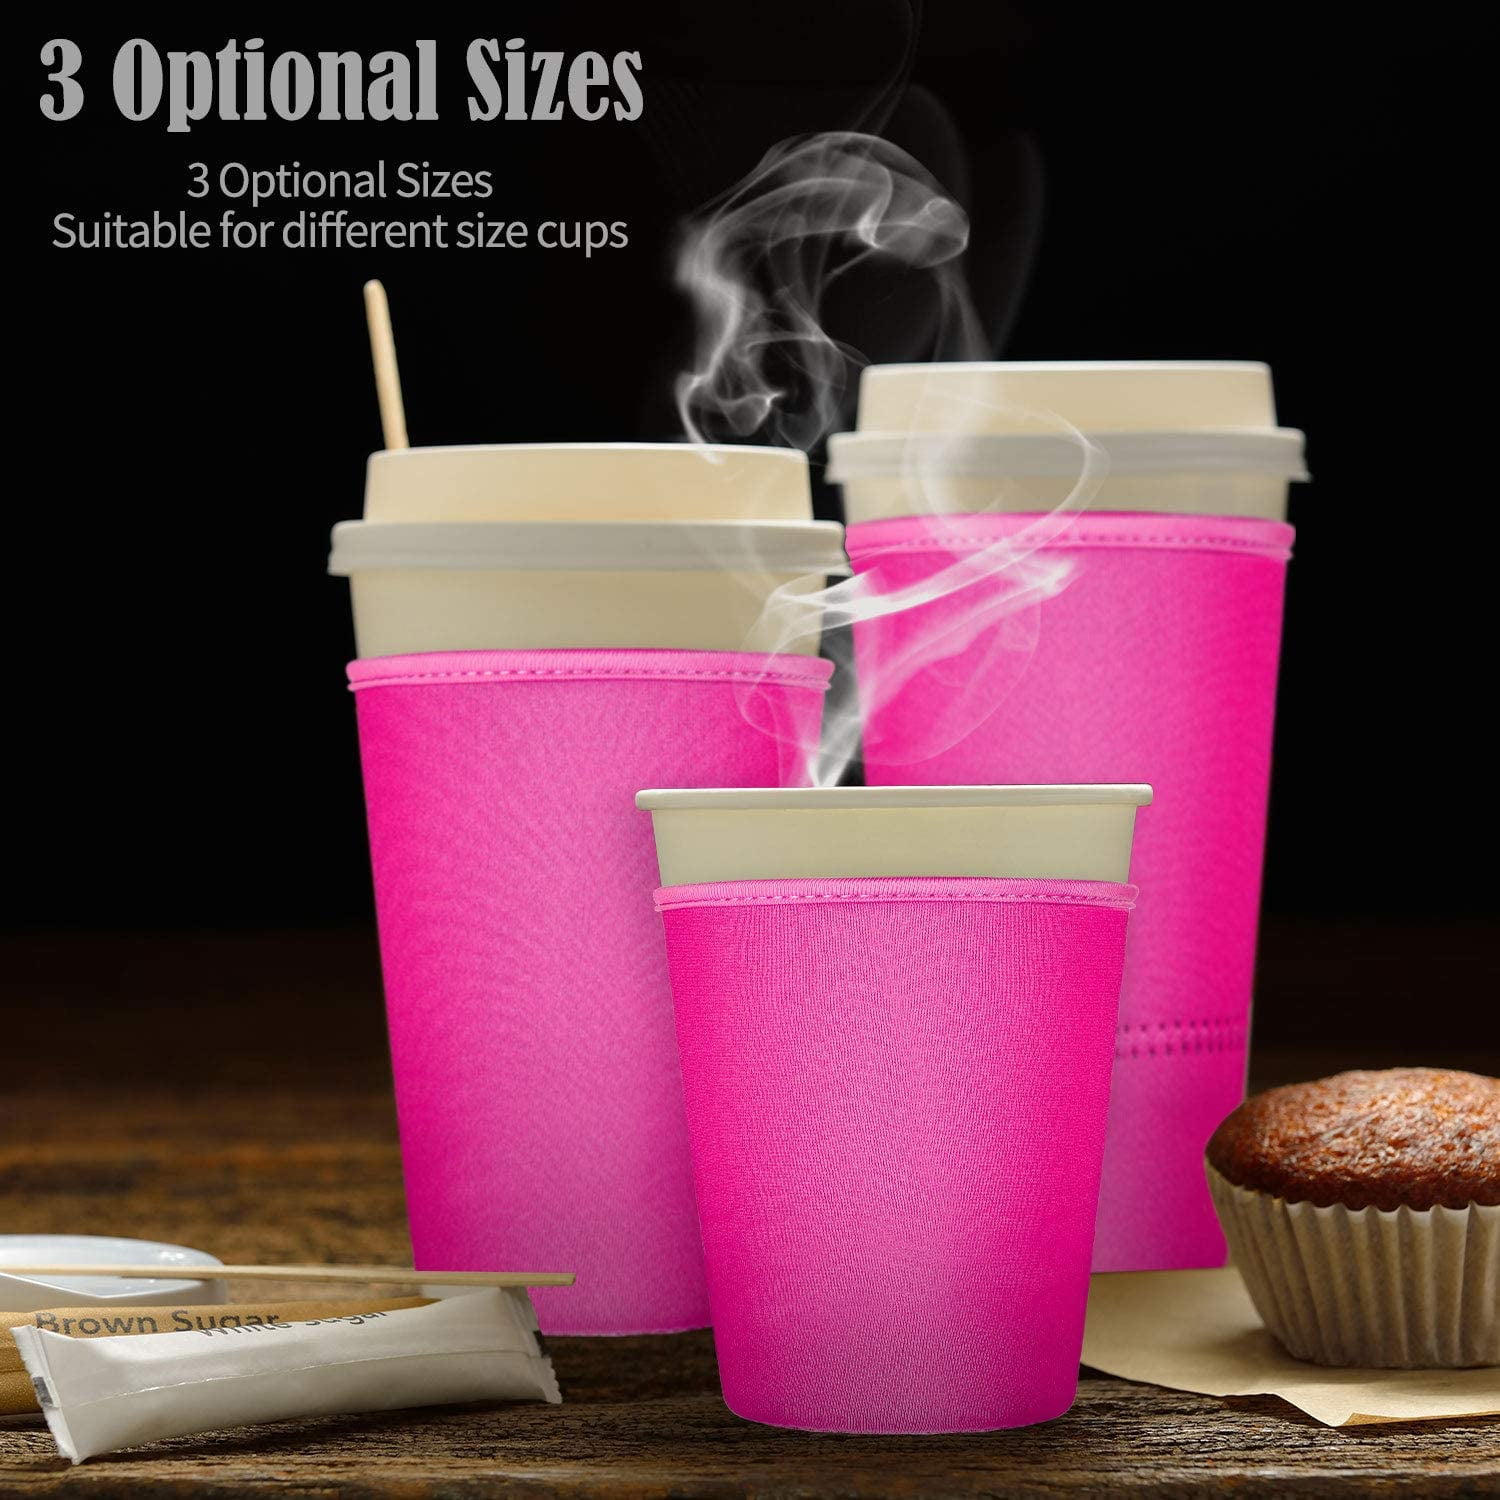 12 Pieces Reusable Iced Coffee Cup Sleeves Insulated Cup Covers Insulator Sleeves Drinks Holders for 10 to 32 Ounce Cold Hot Drink Beverages Cup Bottles 3 Sizes Black, Light Blue, Pink, Green